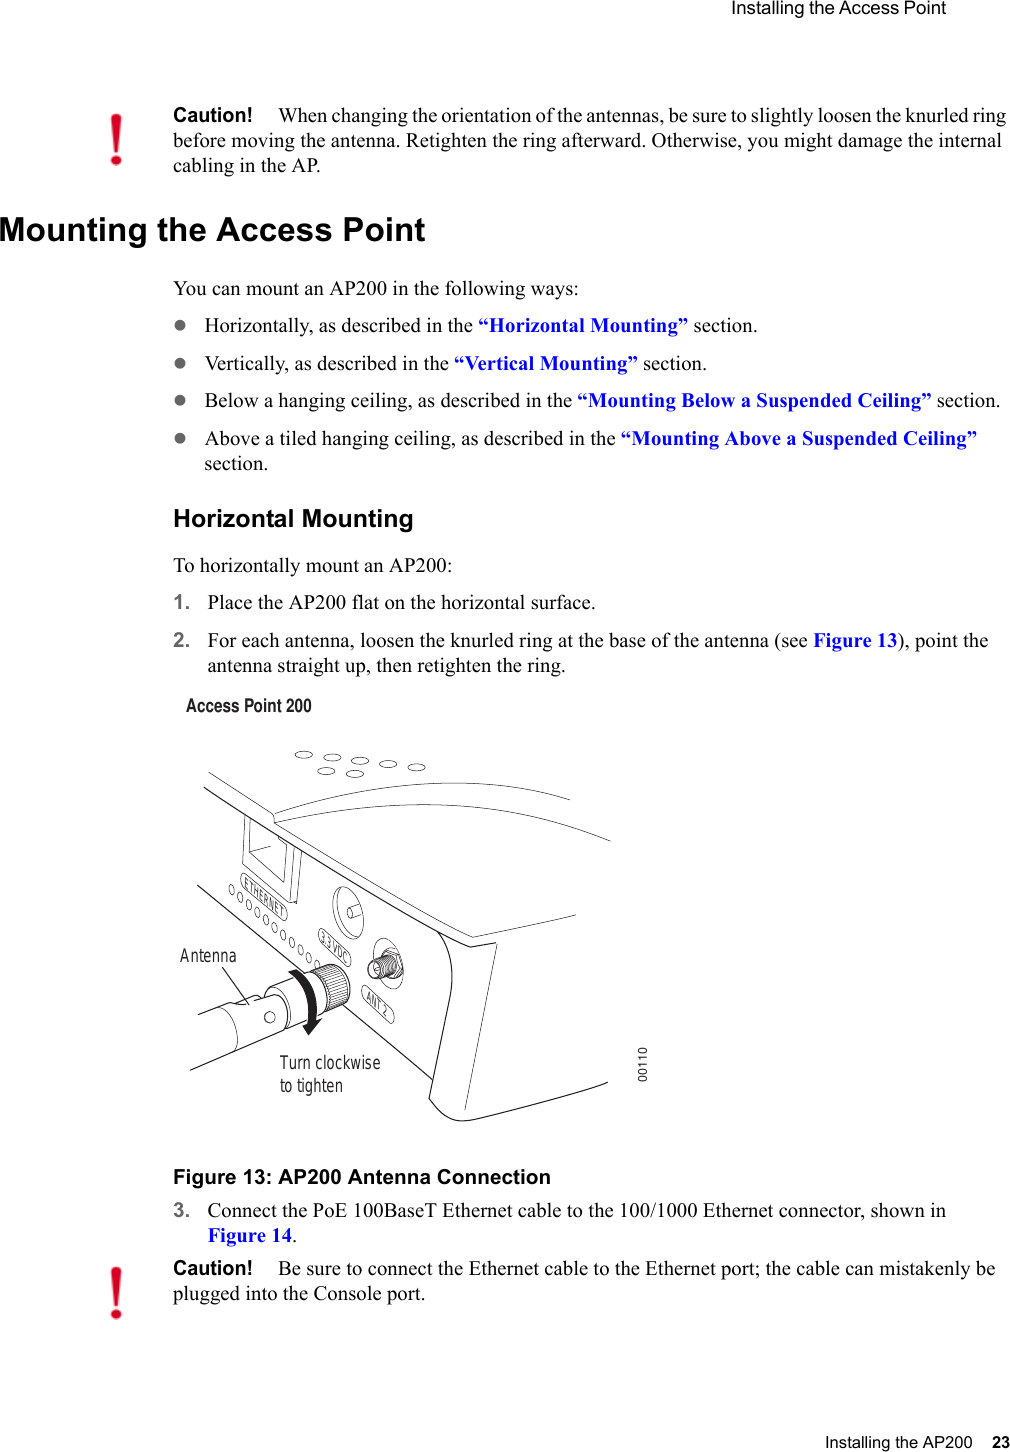  Installing the Access Point Installing the AP200 23 Mounting the Access PointYou can mount an AP200 in the following ways:zHorizontally, as described in the “Horizontal Mounting” section.zVertically, as described in the “Vertical Mounting” section.zBelow a hanging ceiling, as described in the “Mounting Below a Suspended Ceiling” section.zAbove a tiled hanging ceiling, as described in the “Mounting Above a Suspended Ceiling” section.Horizontal MountingTo horizontally mount an AP200:1. Place the AP200 flat on the horizontal surface.2. For each antenna, loosen the knurled ring at the base of the antenna (see Figure 13), point the antenna straight up, then retighten the ring.Figure 13: AP200 Antenna Connection3. Connect the PoE 100BaseT Ethernet cable to the 100/1000 Ethernet connector, shown in Figure 14.Caution!When changing the orientation of the antennas, be sure to slightly loosen the knurled ring before moving the antenna. Retighten the ring afterward. Otherwise, you might damage the internal cabling in the AP.Turn clockwiseto tightenAntennaAccess Point 200ETHERNET3.3 VDC ANT 200110Caution!Be sure to connect the Ethernet cable to the Ethernet port; the cable can mistakenly be plugged into the Console port.